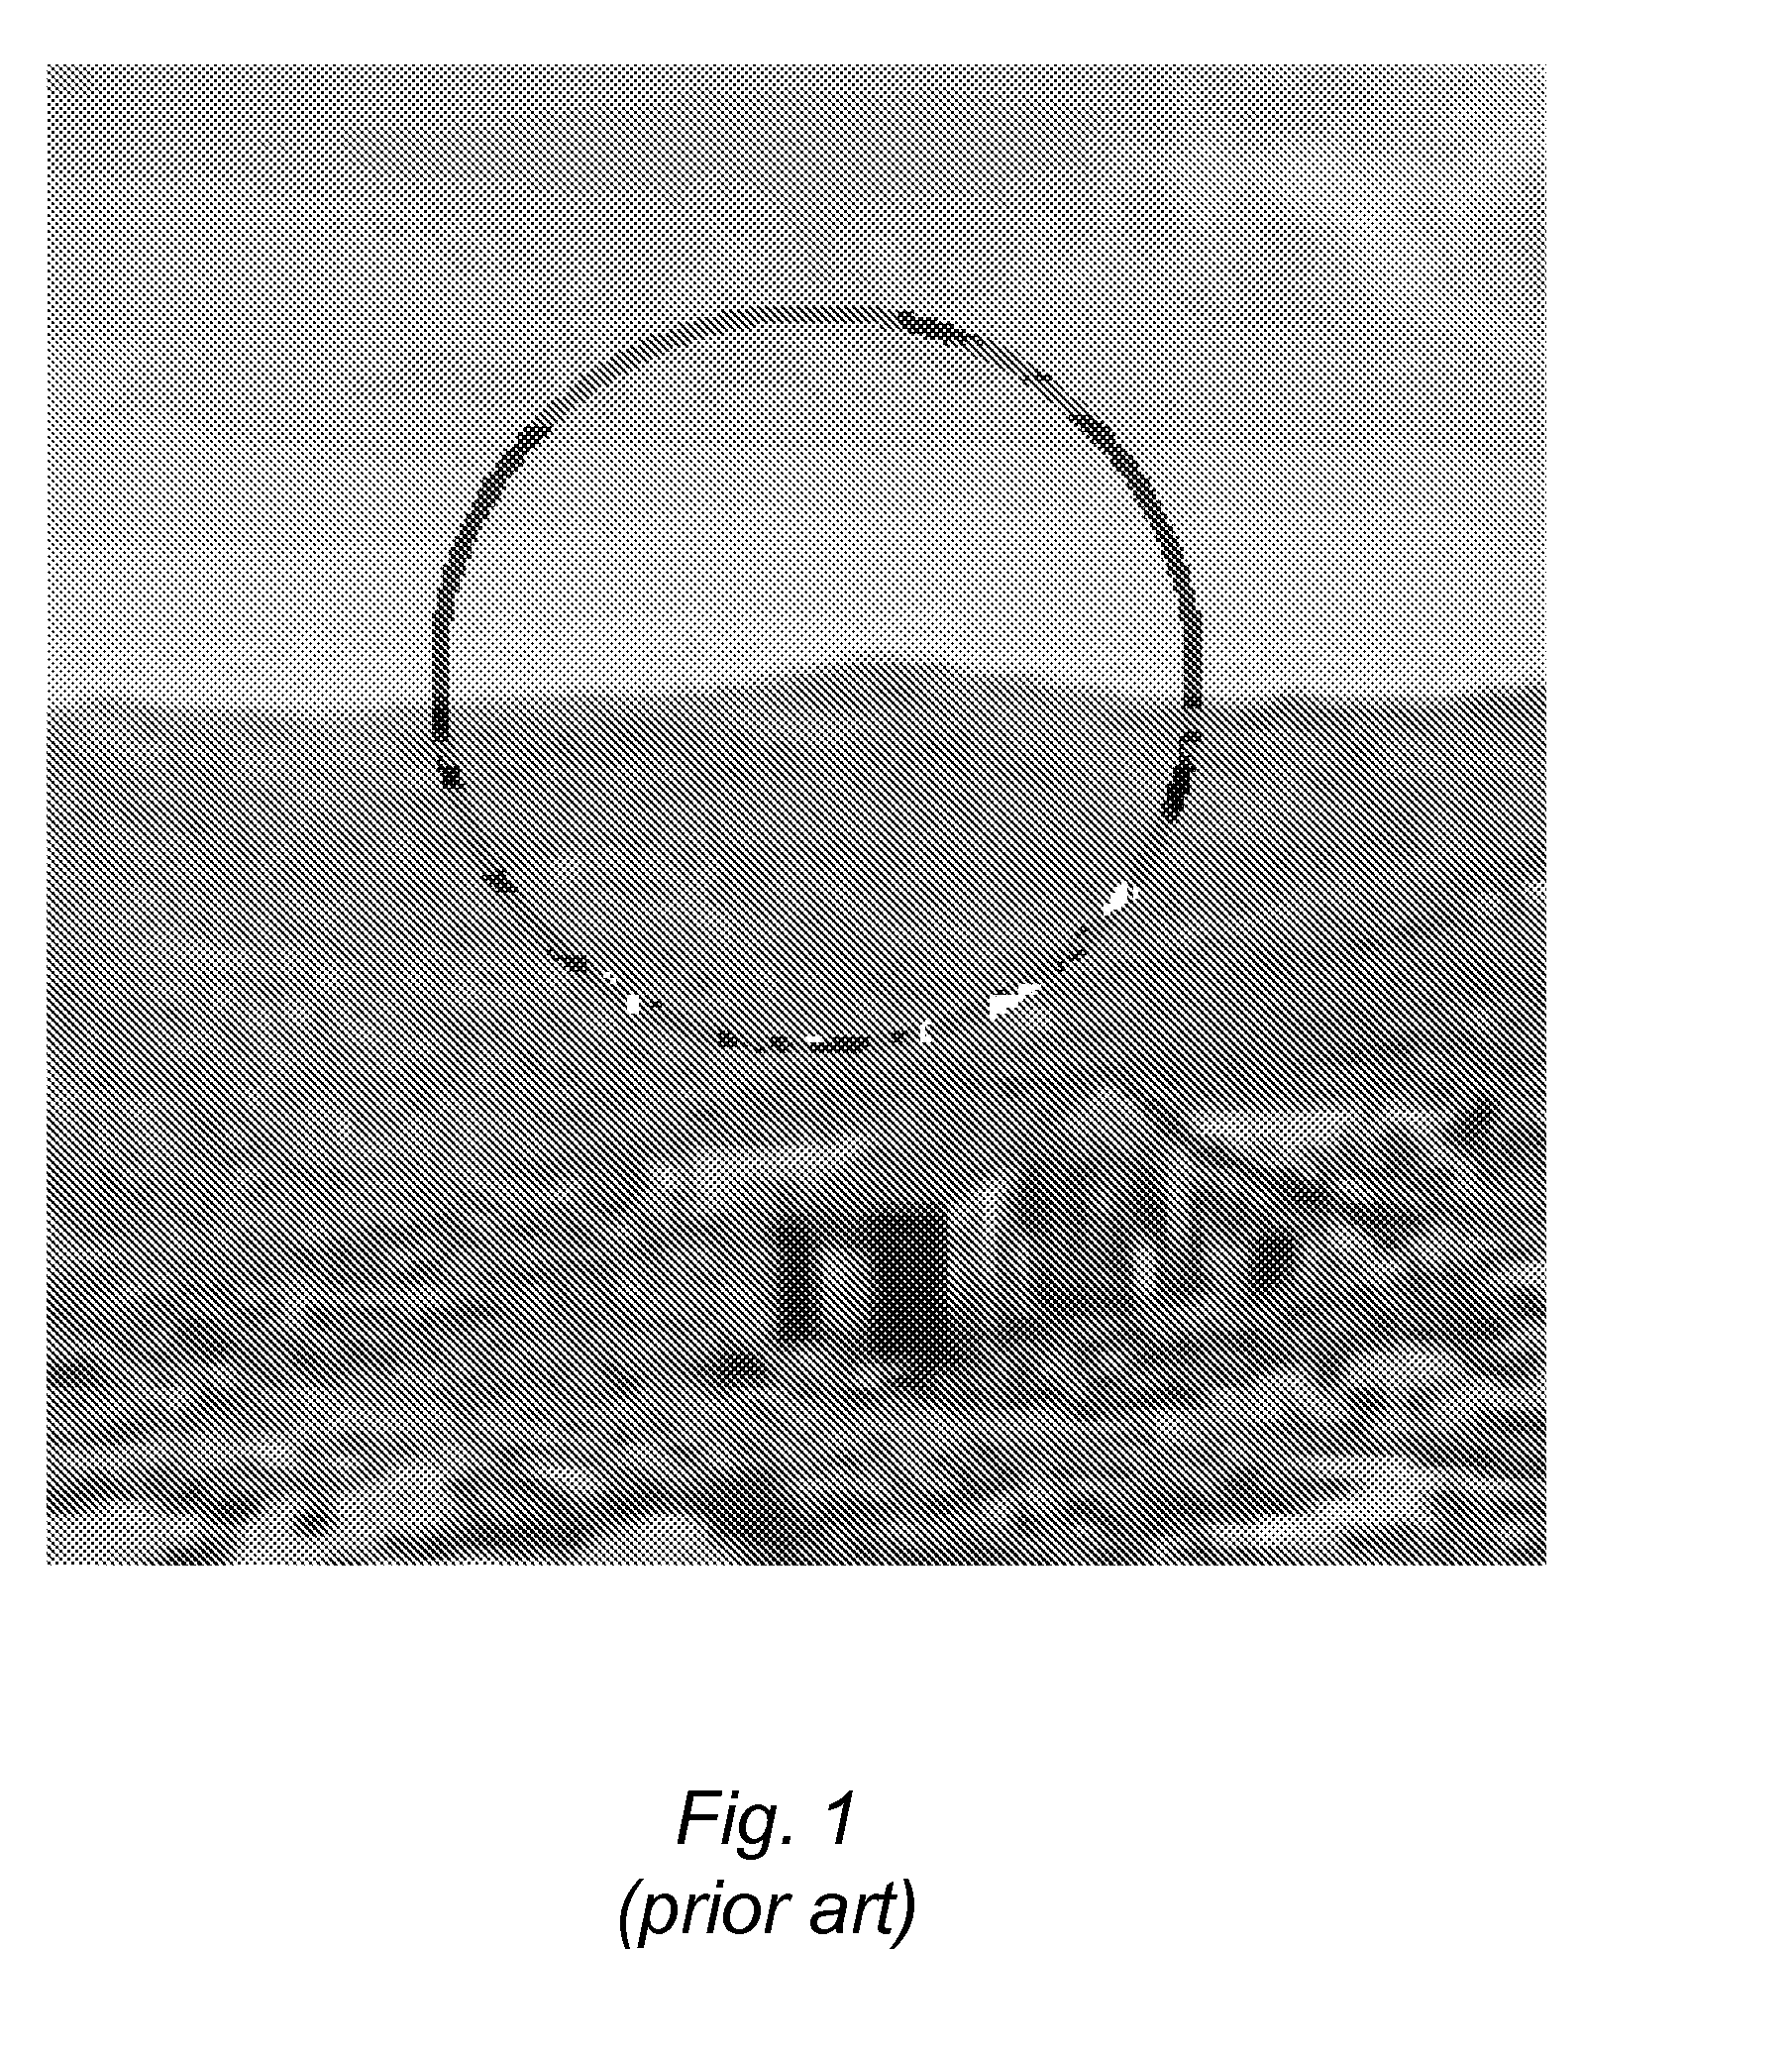 Method and System for Dynamic, Luminance-Based Color Contrasting in a Region of Interest in a Graphic Image